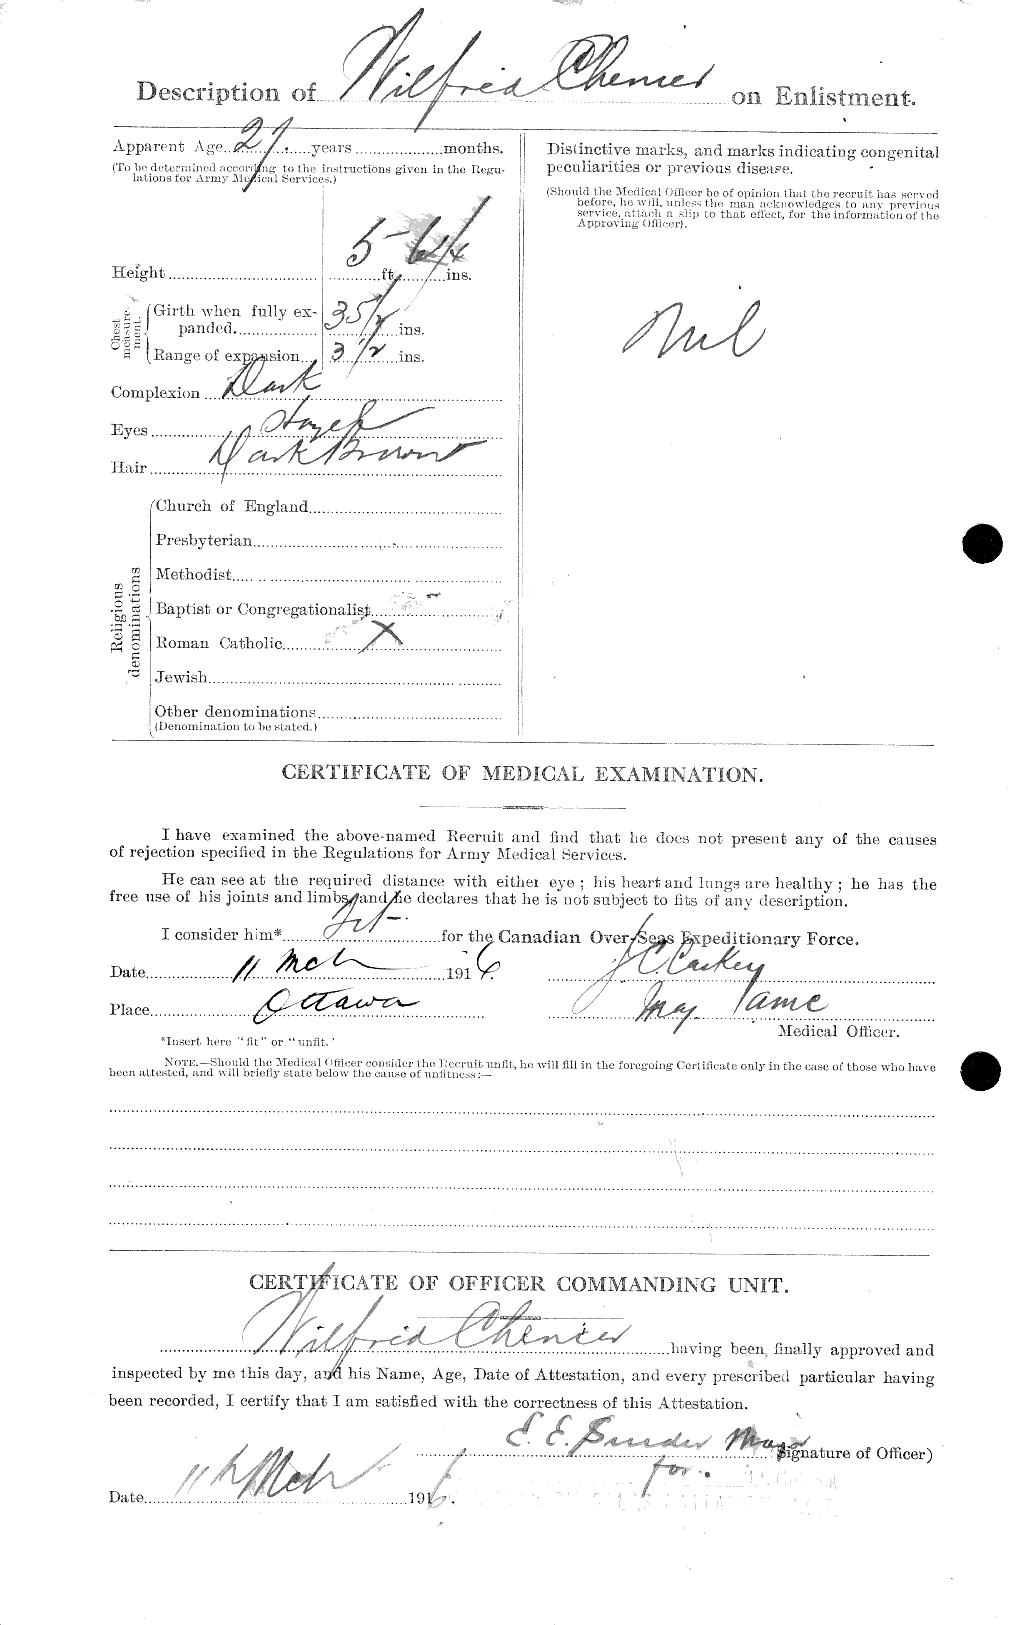 Personnel Records of the First World War - CEF 017439b